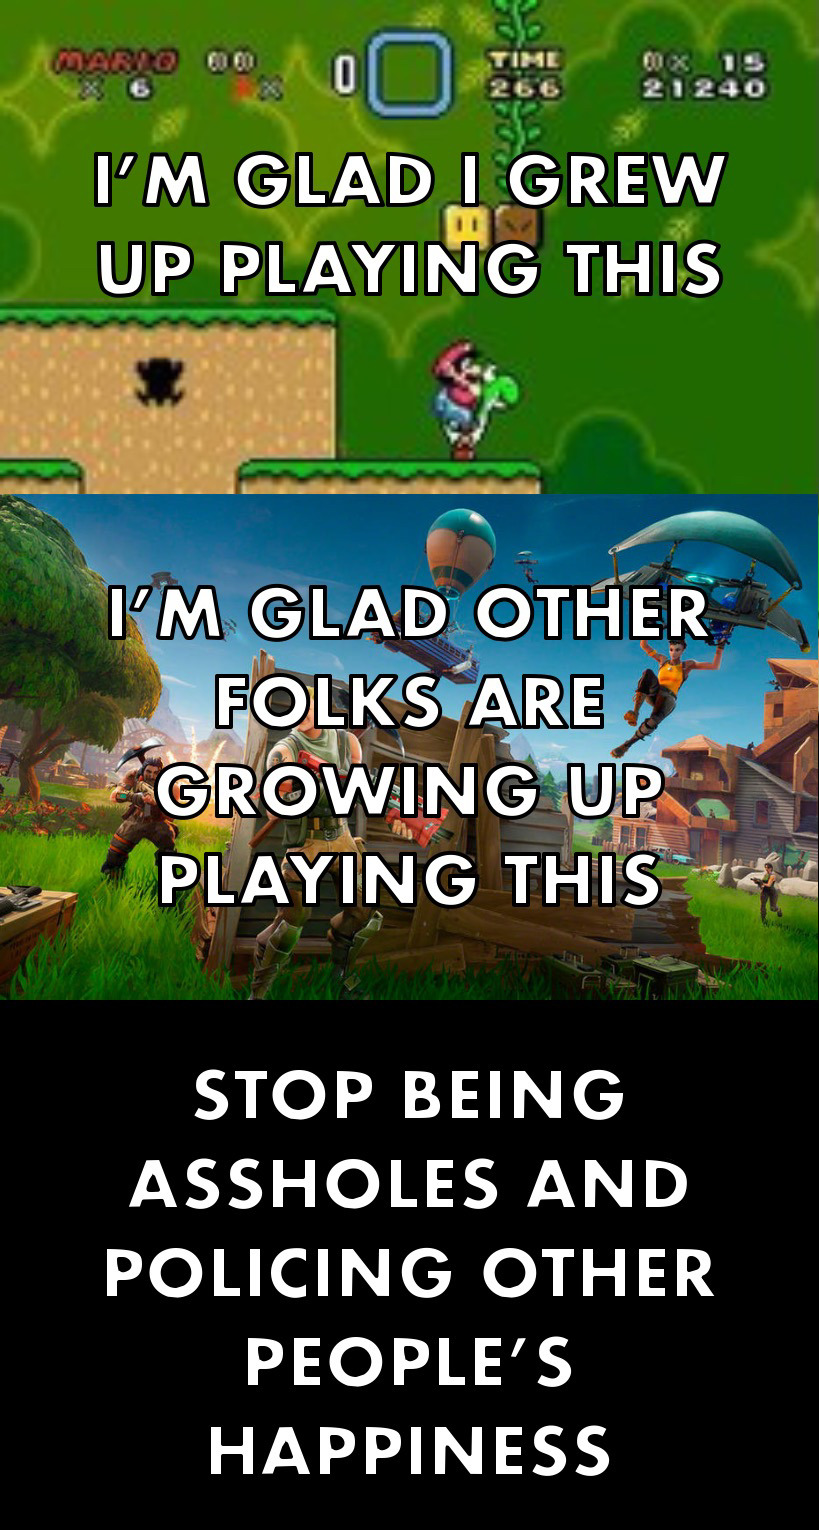 funny gaming memes - nature - Mario 06 0 Time 266 00 x 15 21240 I'M Glad I Grew Up Playing This I'M Glad Other Folks Are Growing Up Playing This Stop Being Assholes And Policing Other People'S Happiness